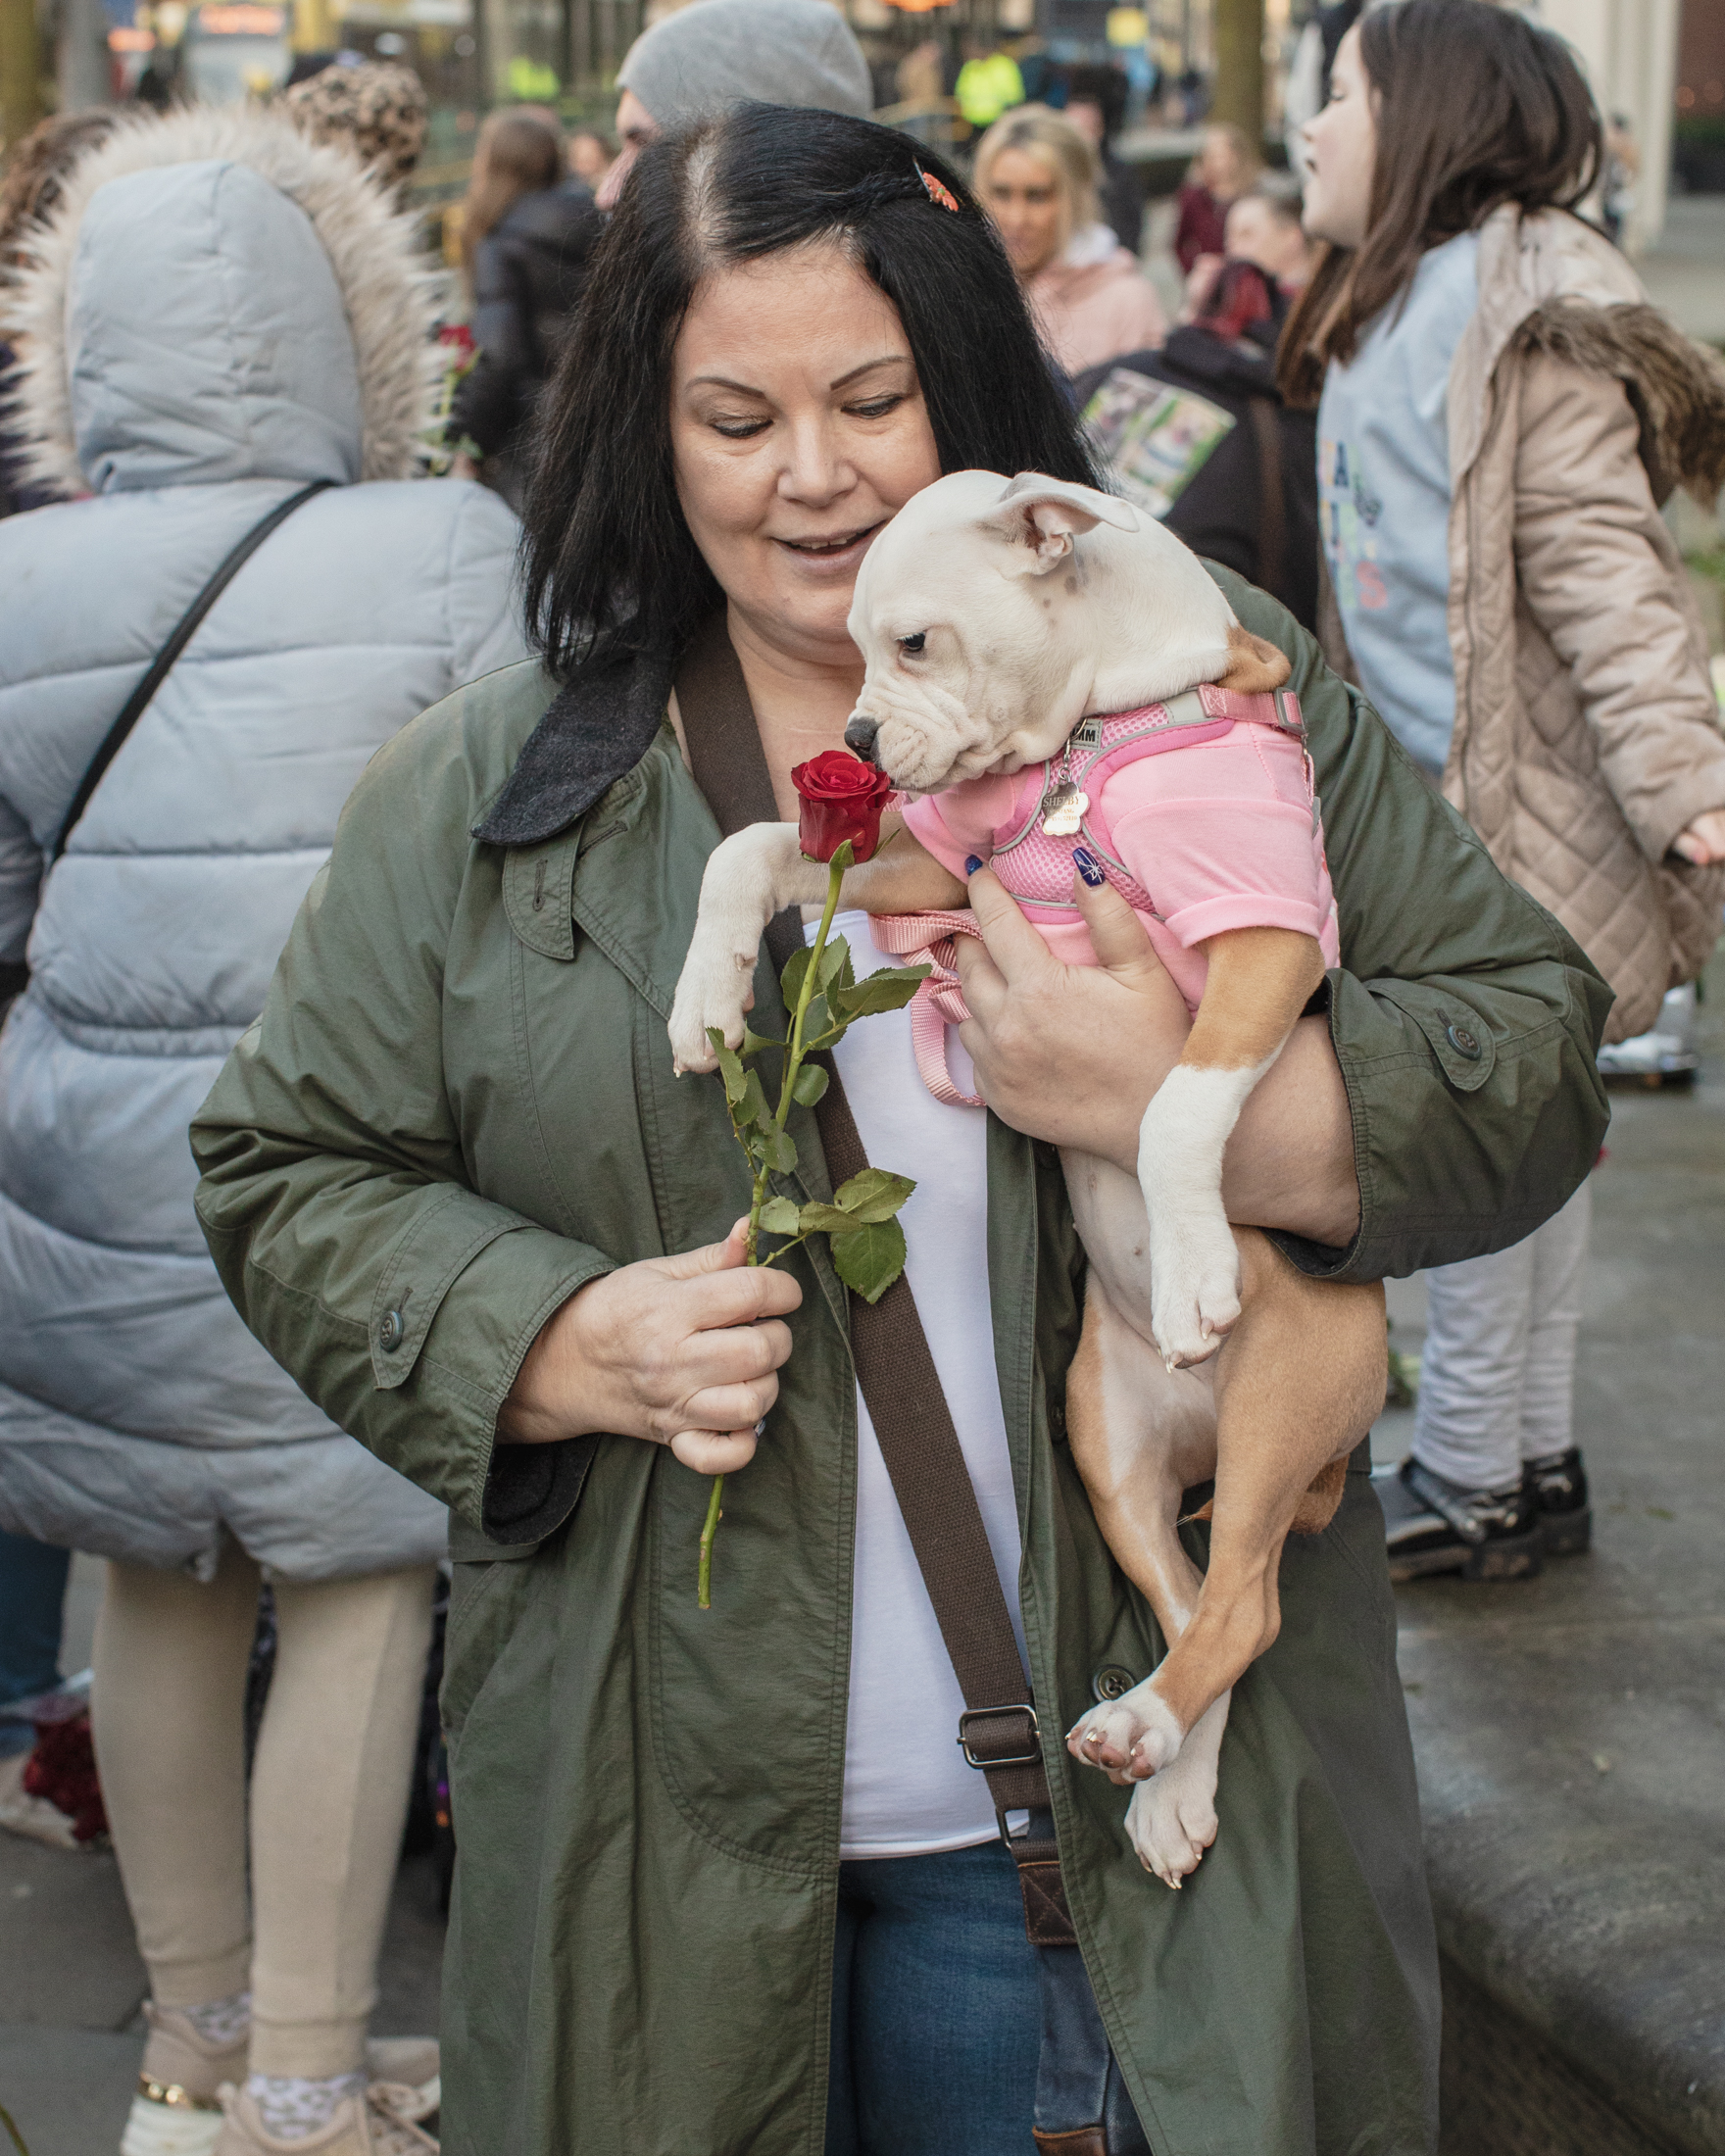 Manchester, UK: A woman holds an XL Bully puppy who sniffs a rose